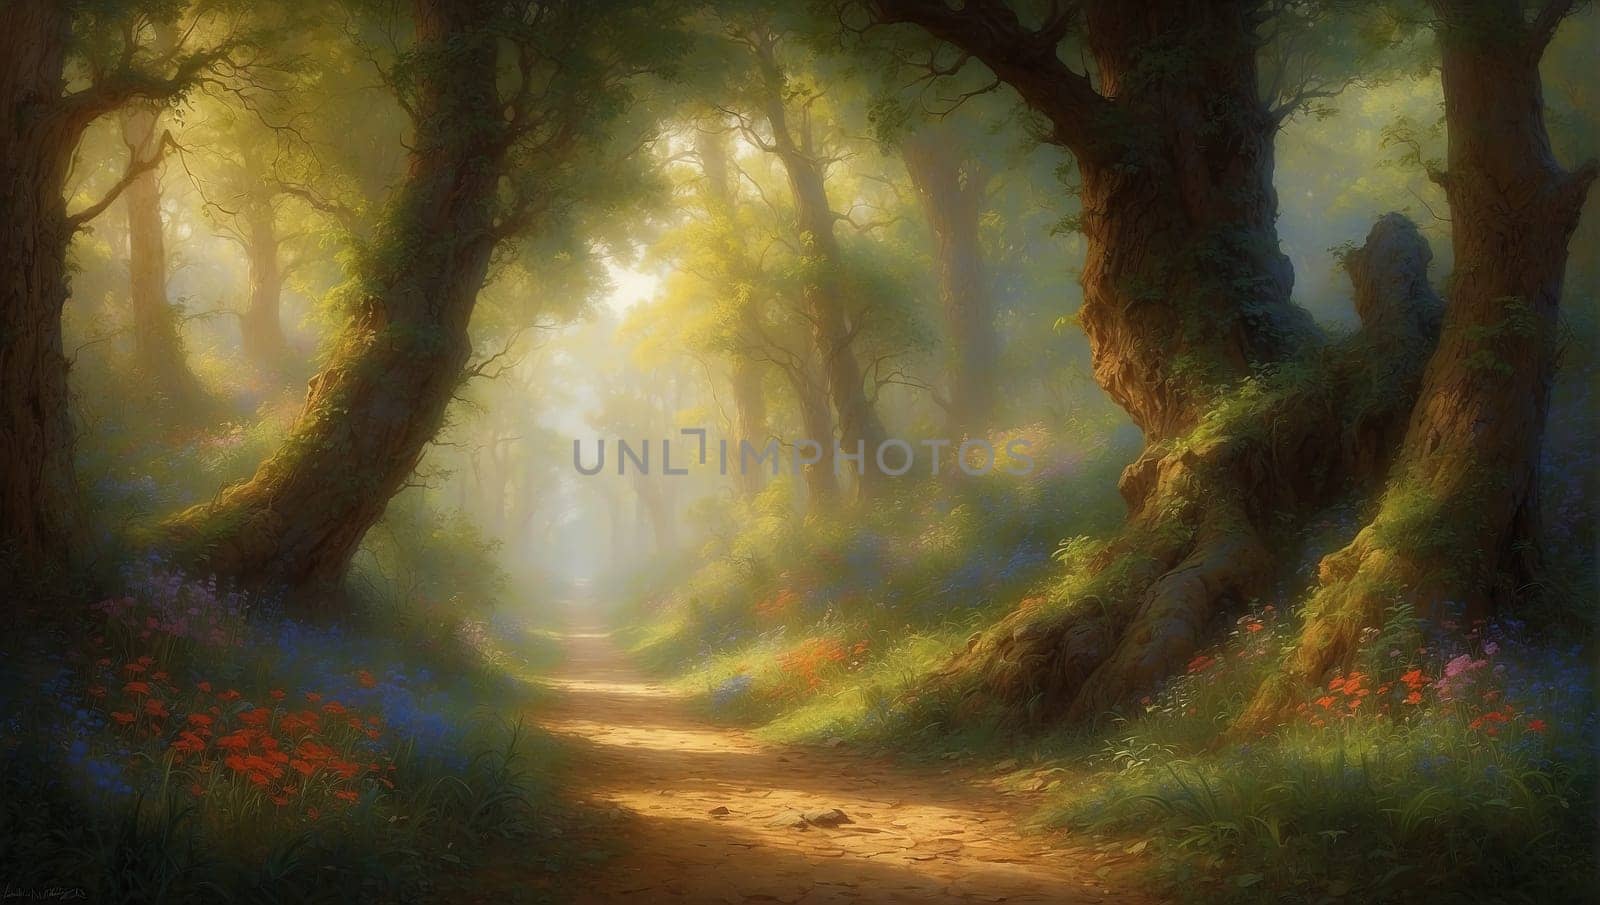 Sunrise in a magical forest by applesstock